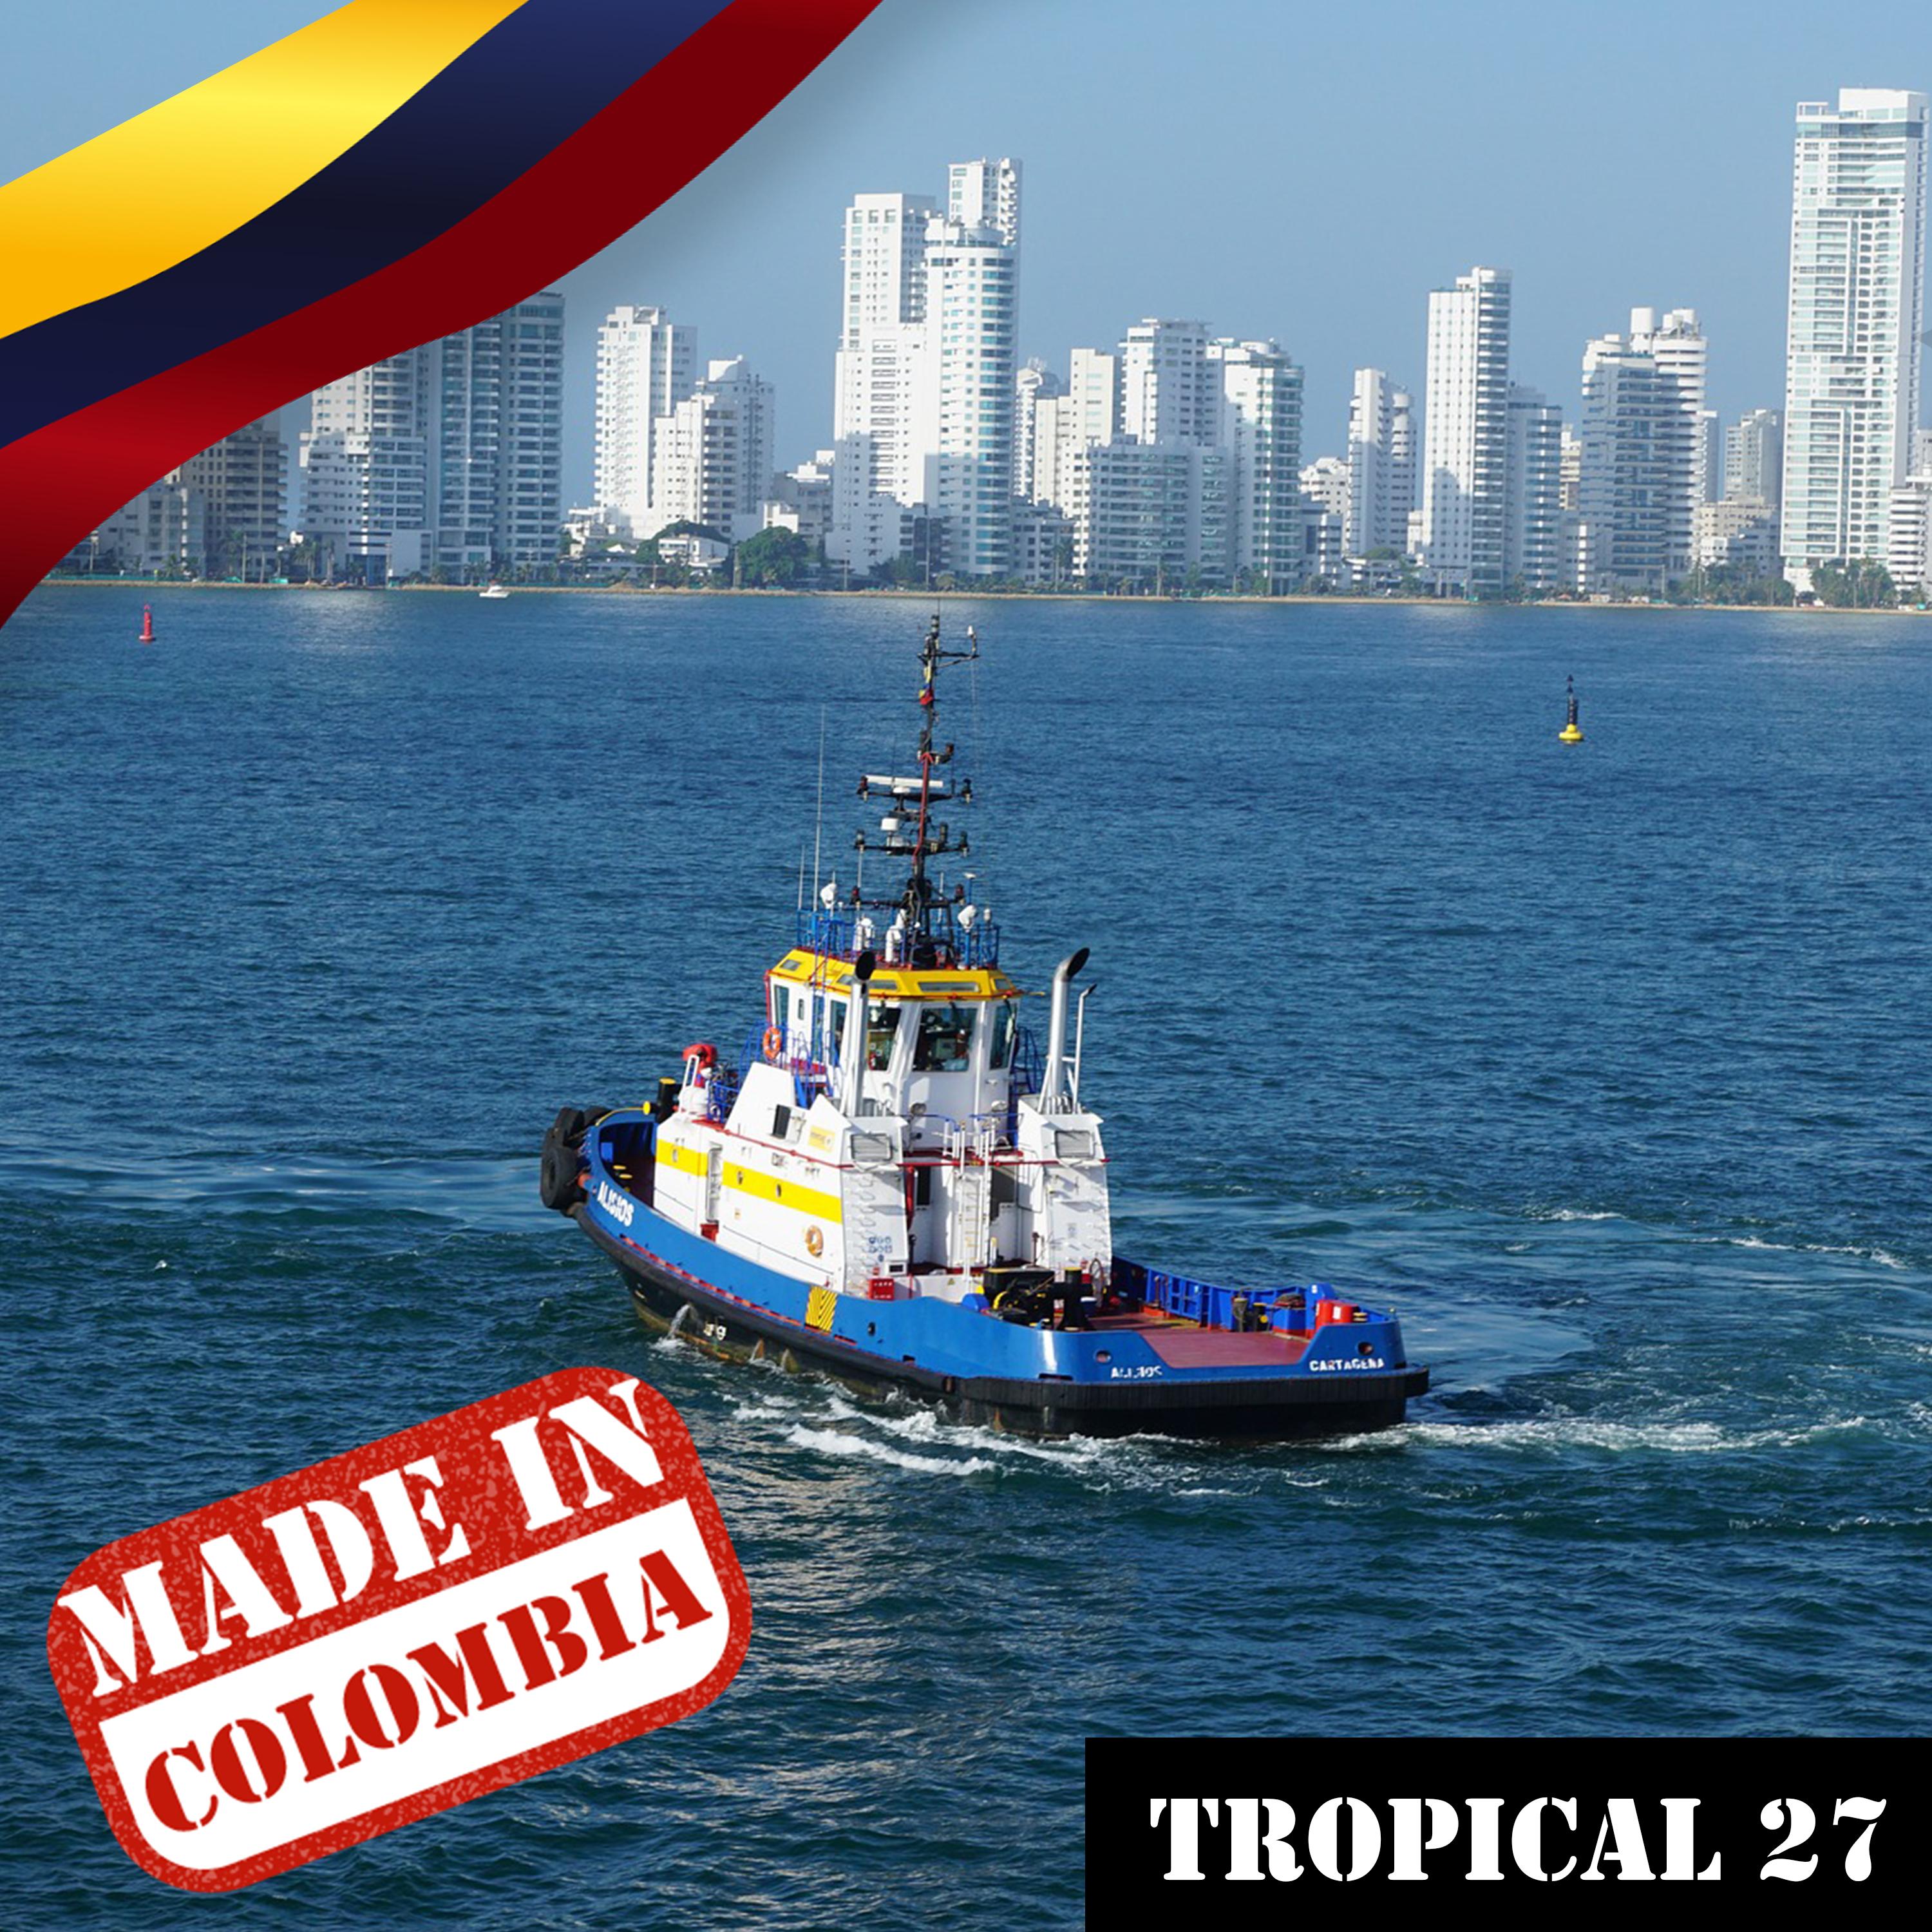 Made In Colombia / Tropical / 27